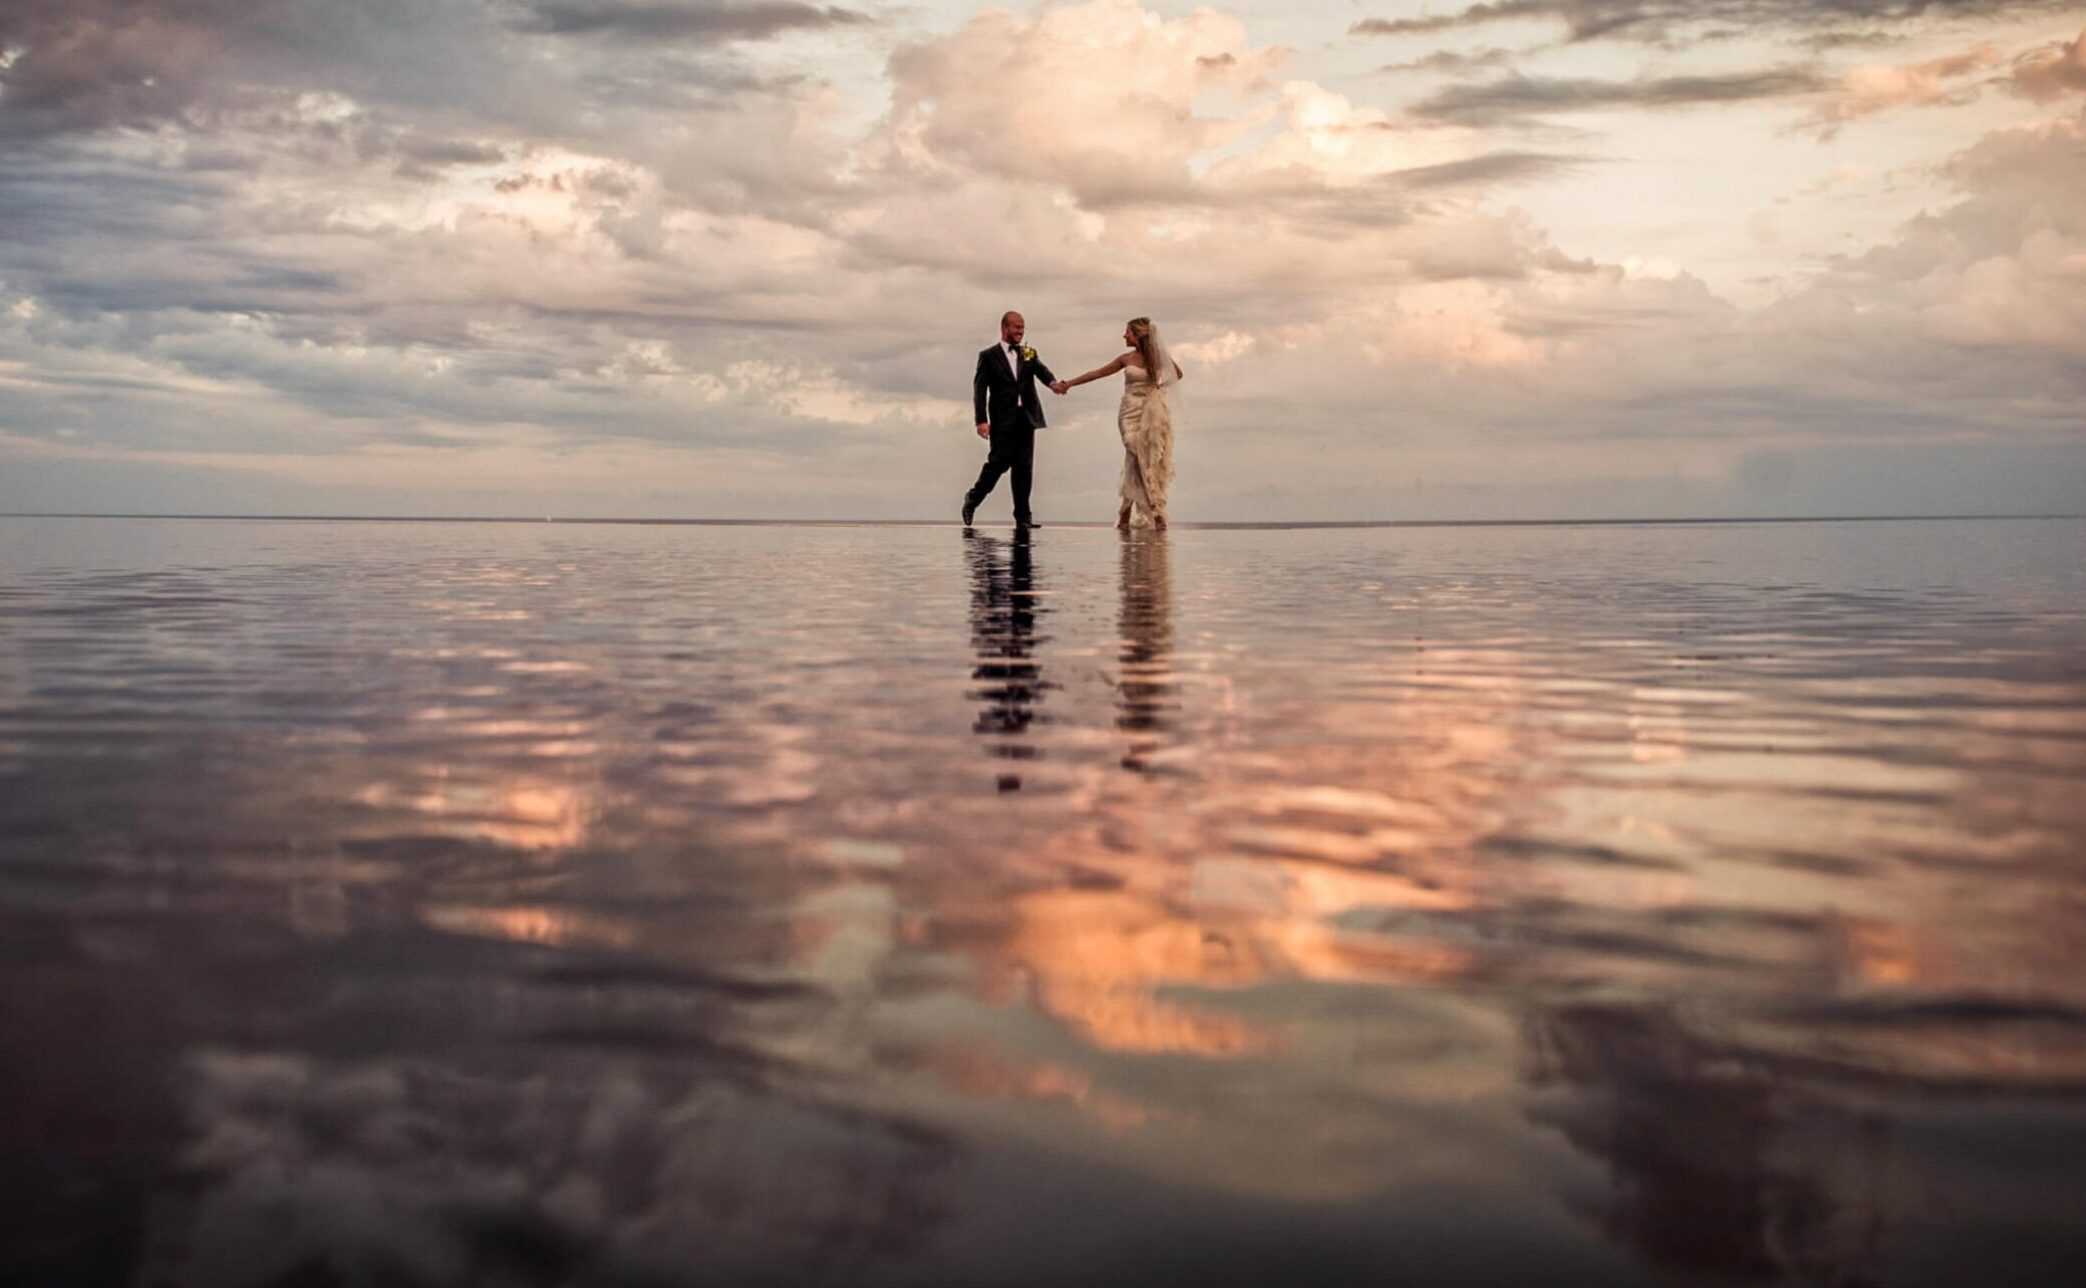 A destination wedding bride and groom standing in the water at sunset.